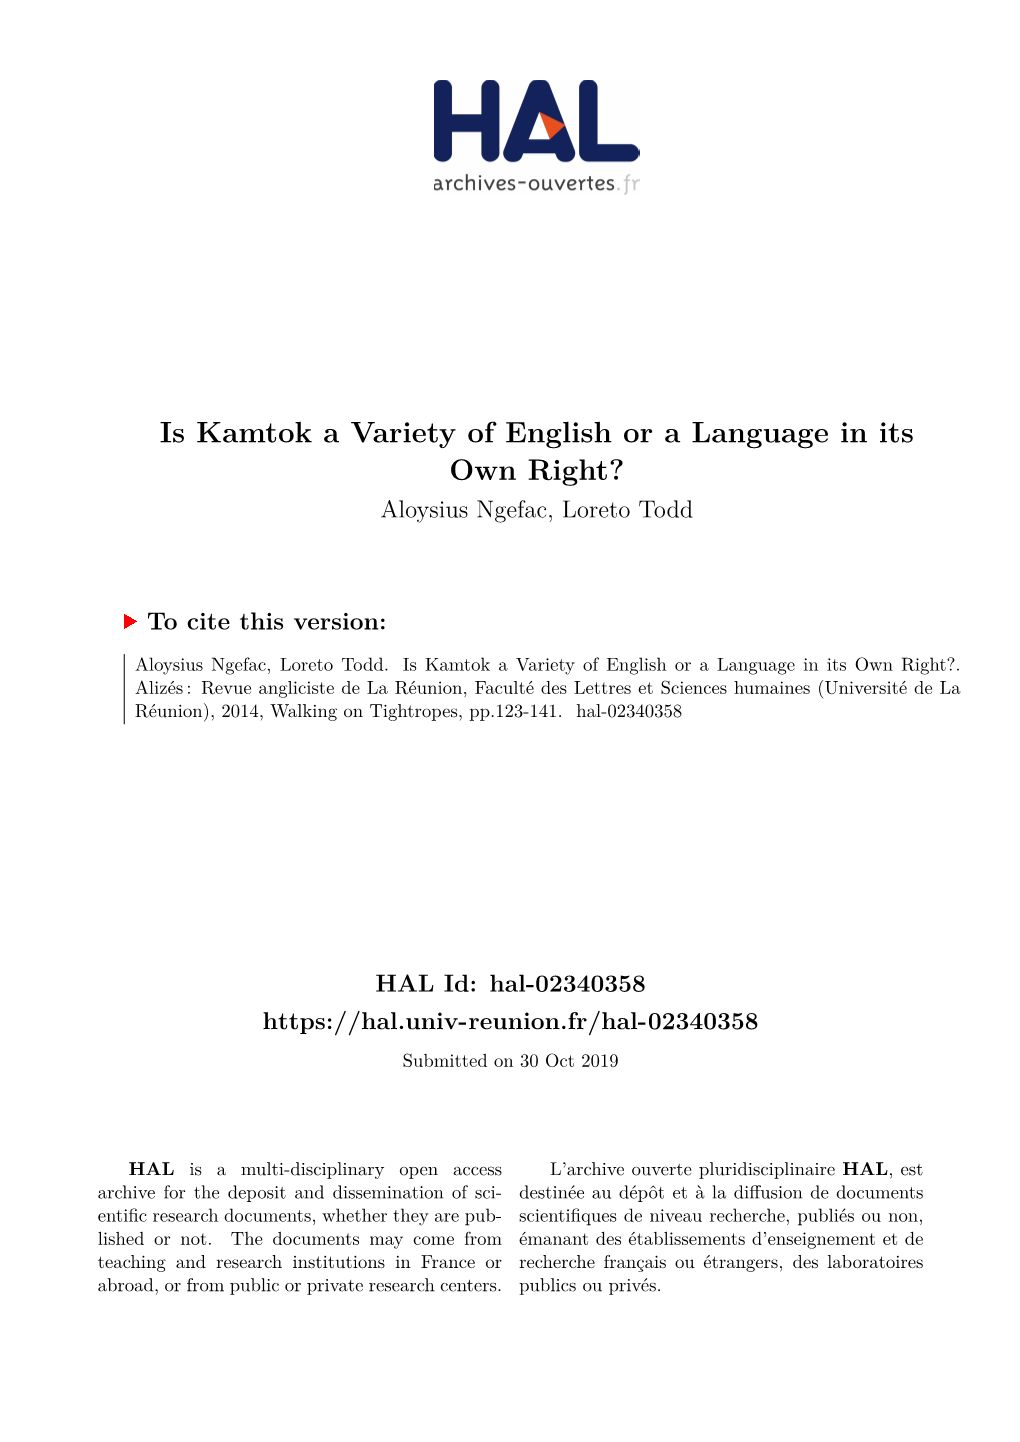 Is Kamtok a Variety of English Or a Language in Its Own Right? Aloysius Ngefac, Loreto Todd